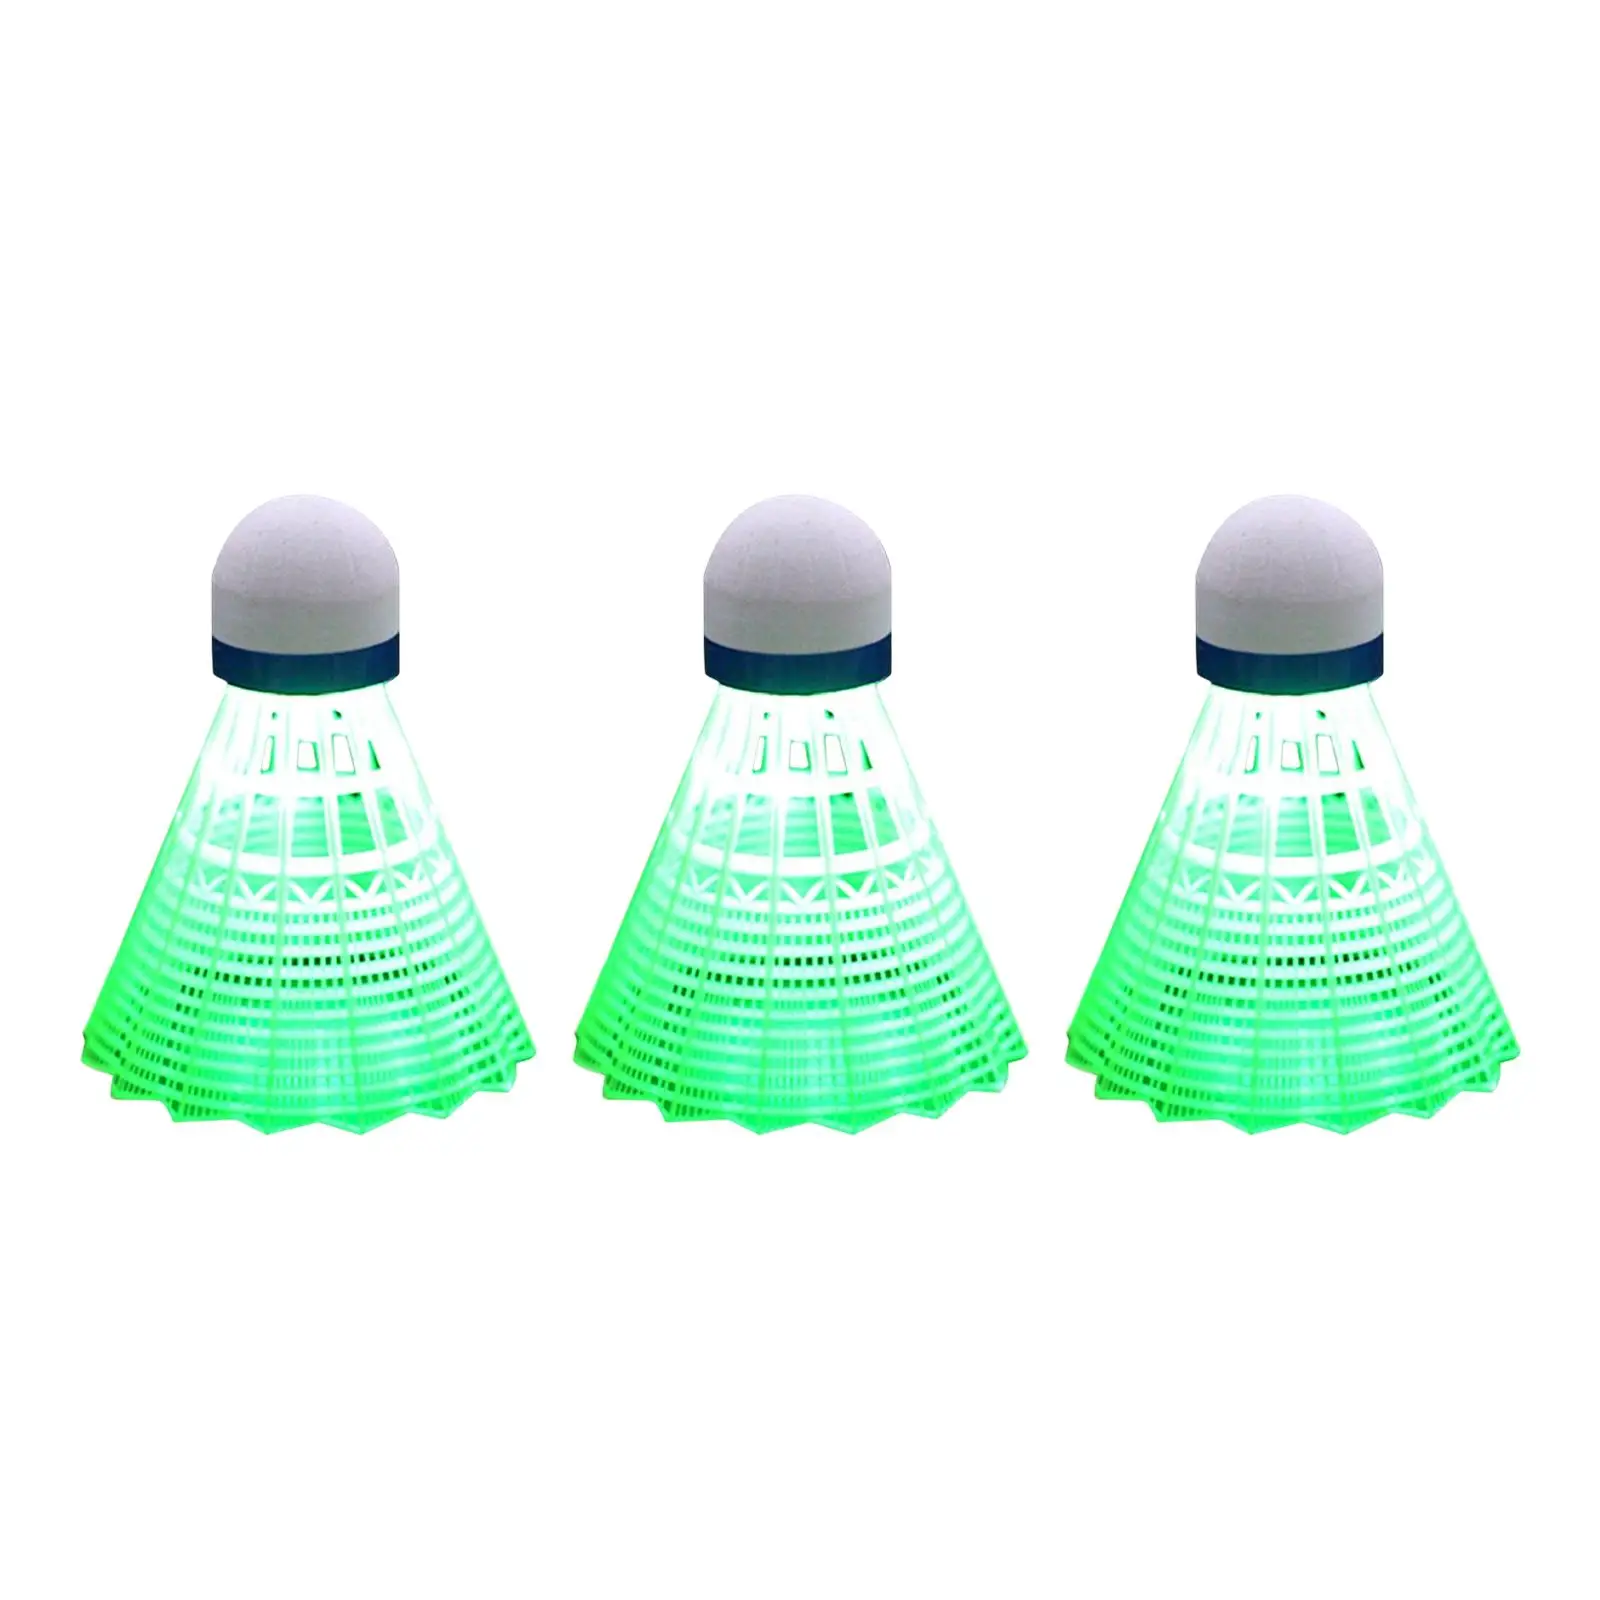 3x LED Badminton Shuttlecocks Light up Birdies Great Stability for Training Outdoor Indoor Sports Exercise Practice Kids Adults